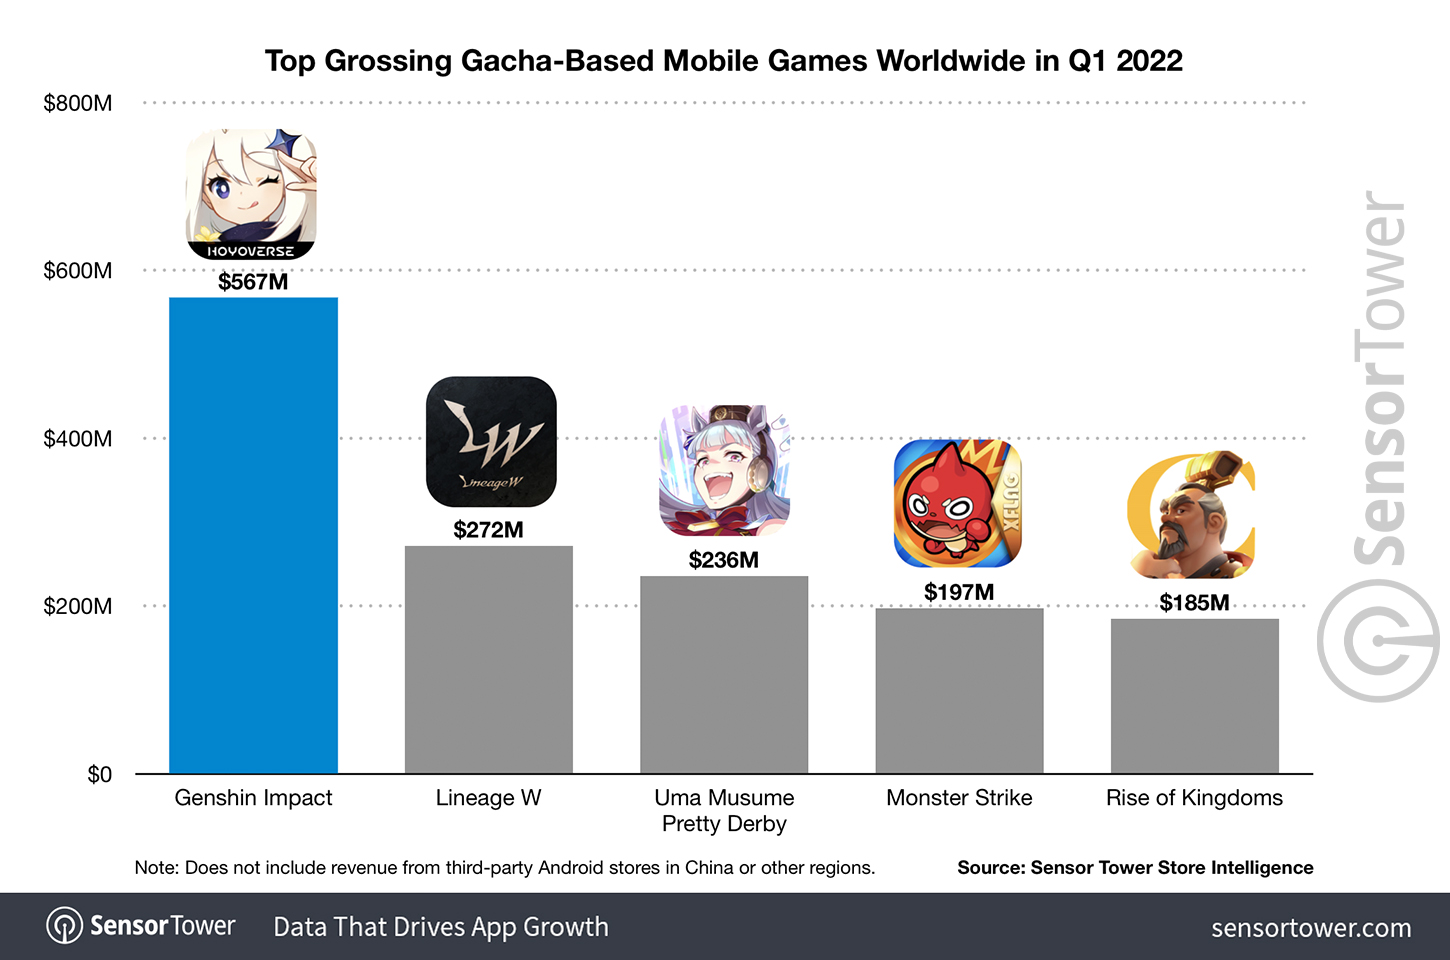 The top grossing games on the Google Play Store. Now how do all